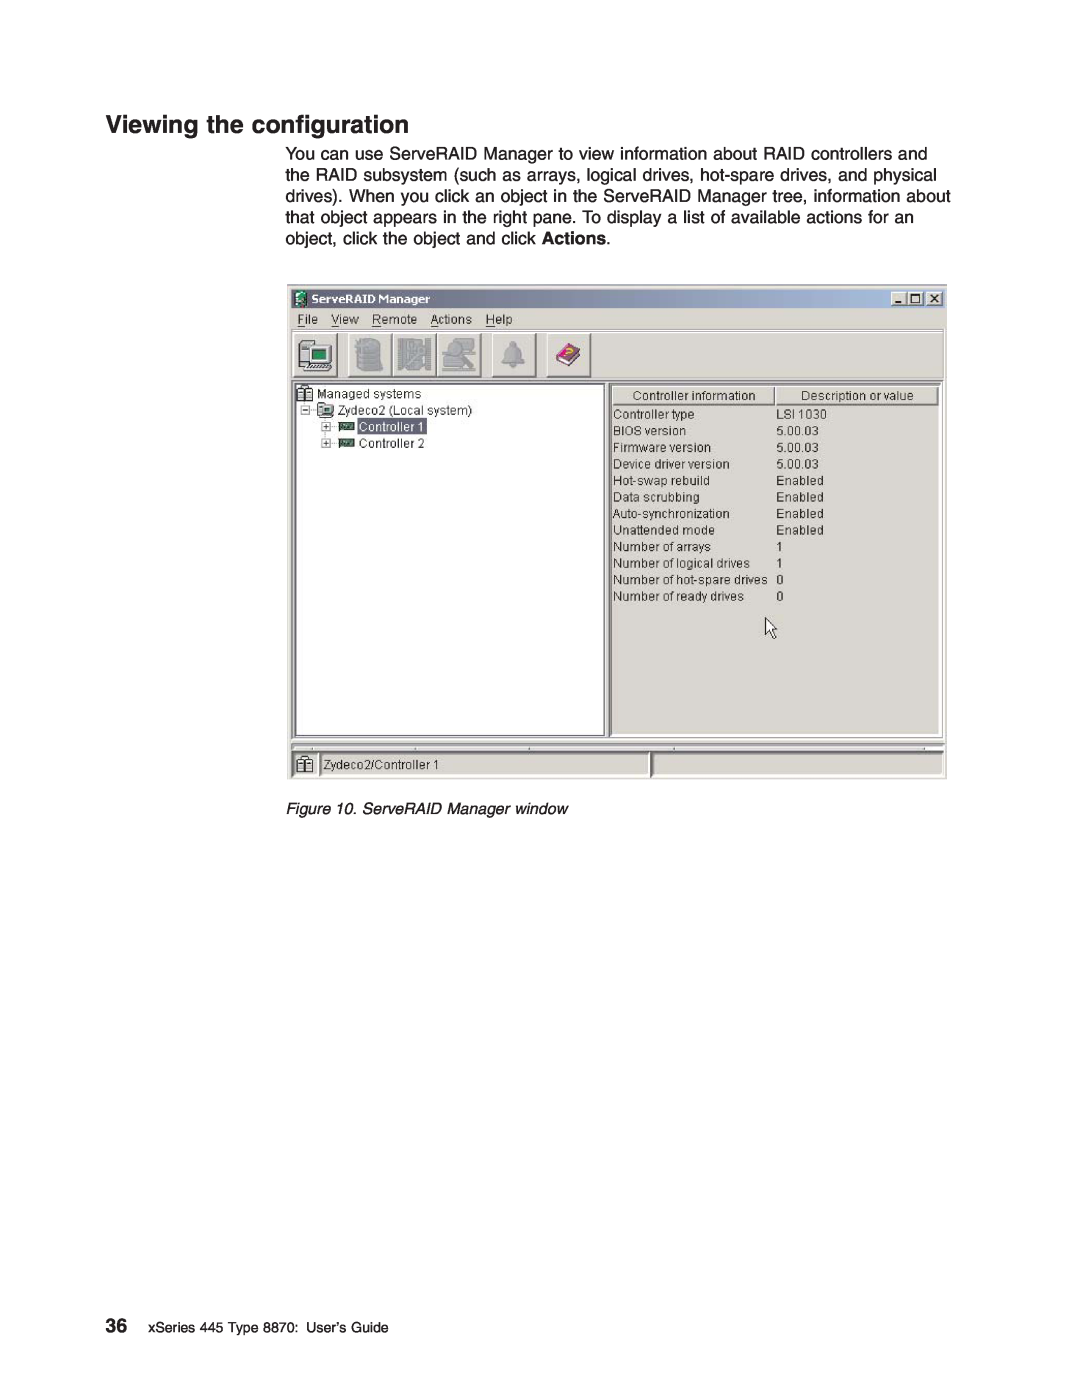 IBM 8870 manual Viewing the configuration, ServeRAID Manager window 